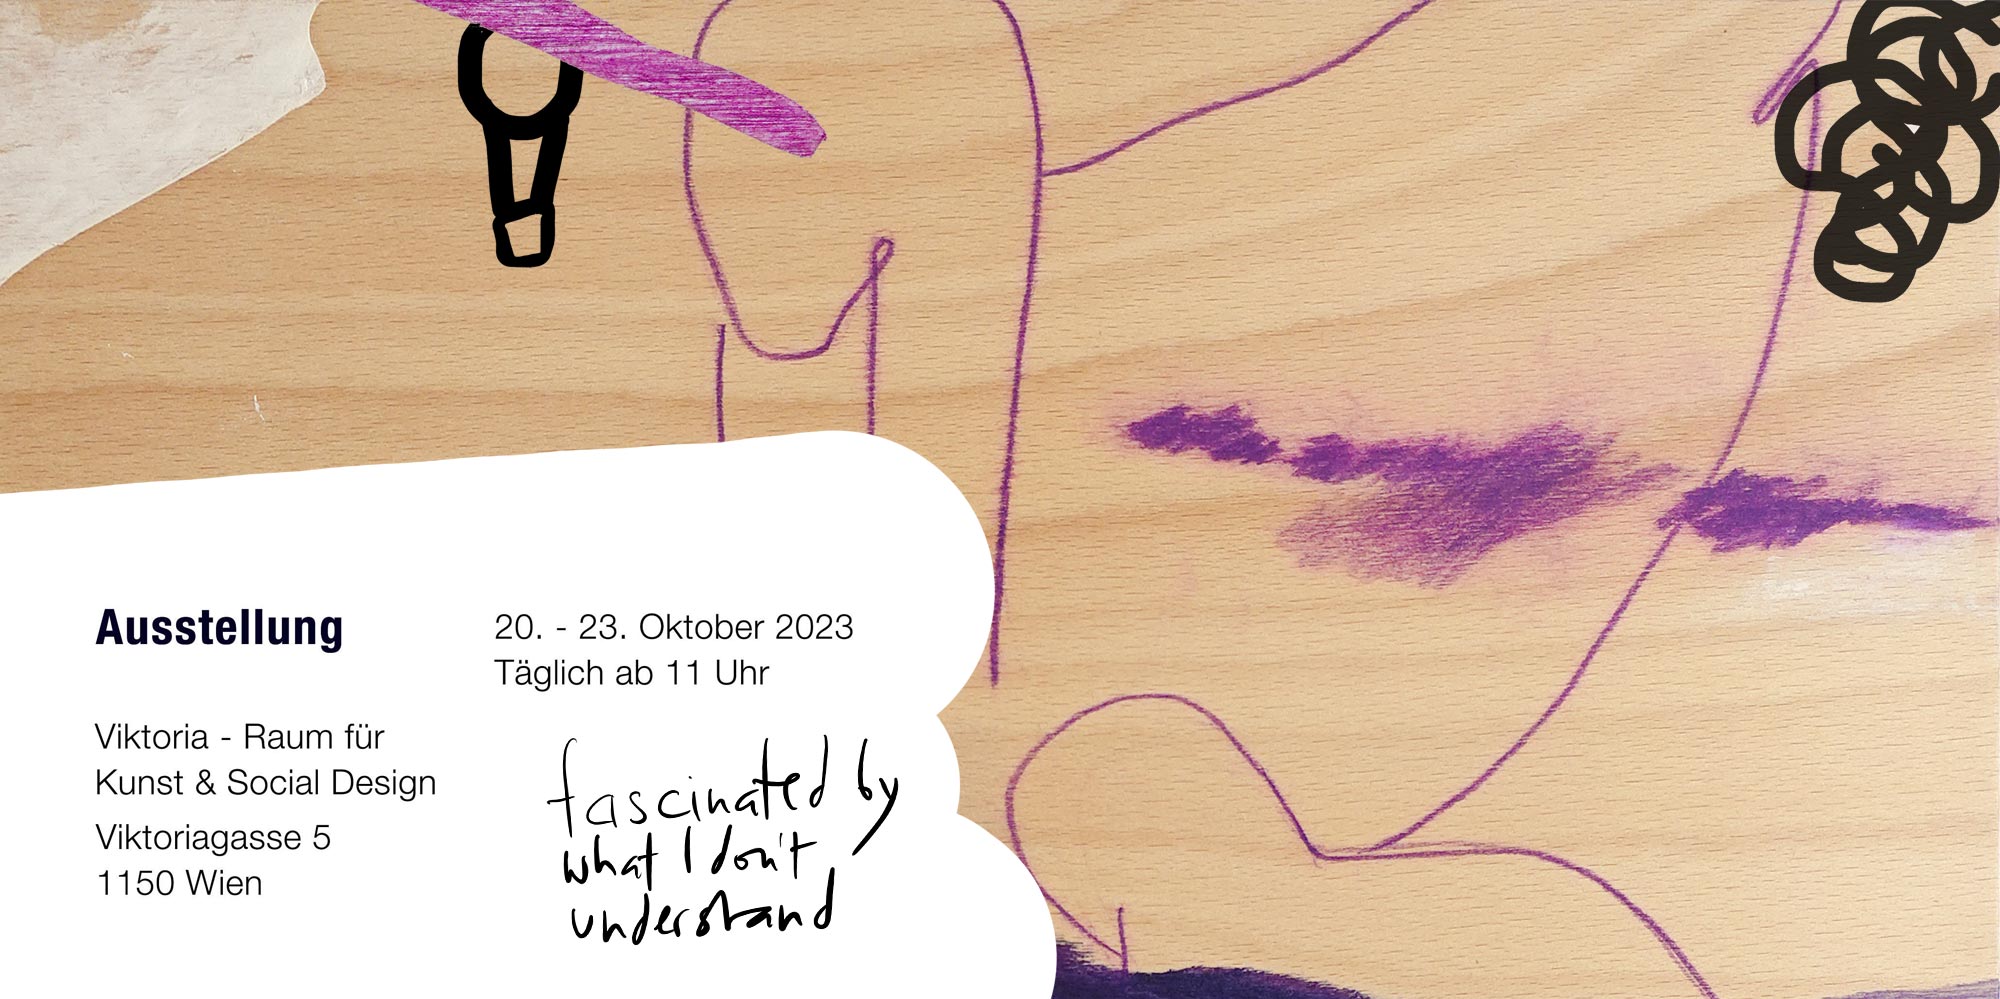 Exhibition flyer - Wolfgang Kschwendt: "Fascinated by What I don't Understand" - 2023